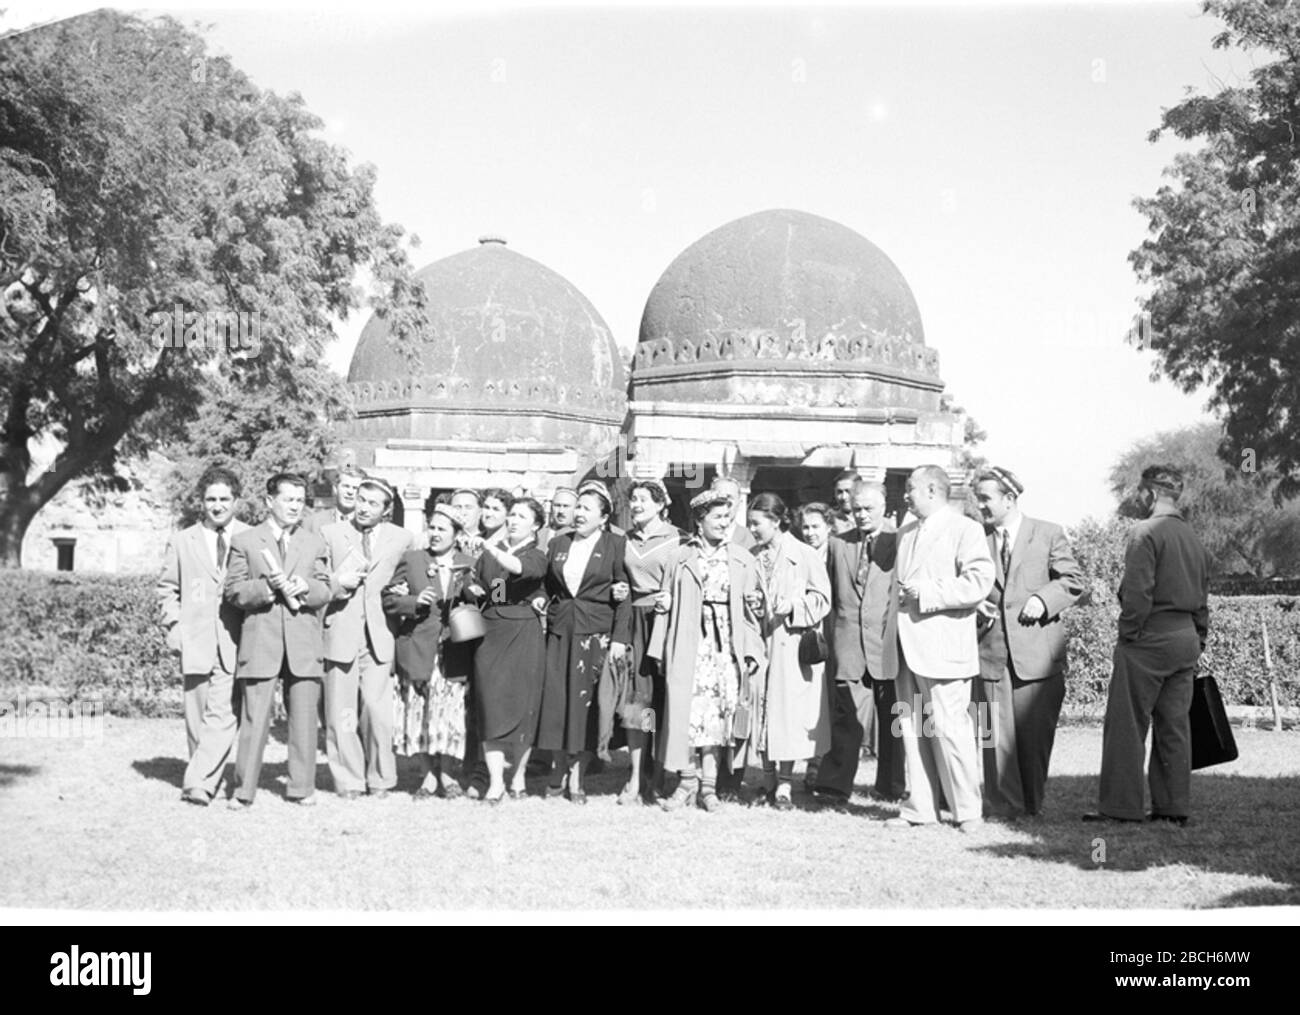 'English: Theosophical Society Banaras/October,1955,A32a Dr. Annie Besant.; 21 October 2003, 22:53:15; http://photodivision.gov.in/IntroPhotodetails.asp?thisPage=1482; Photo Division, Ministry of Information & Broadcasting, Government of India; ' Stock Photo